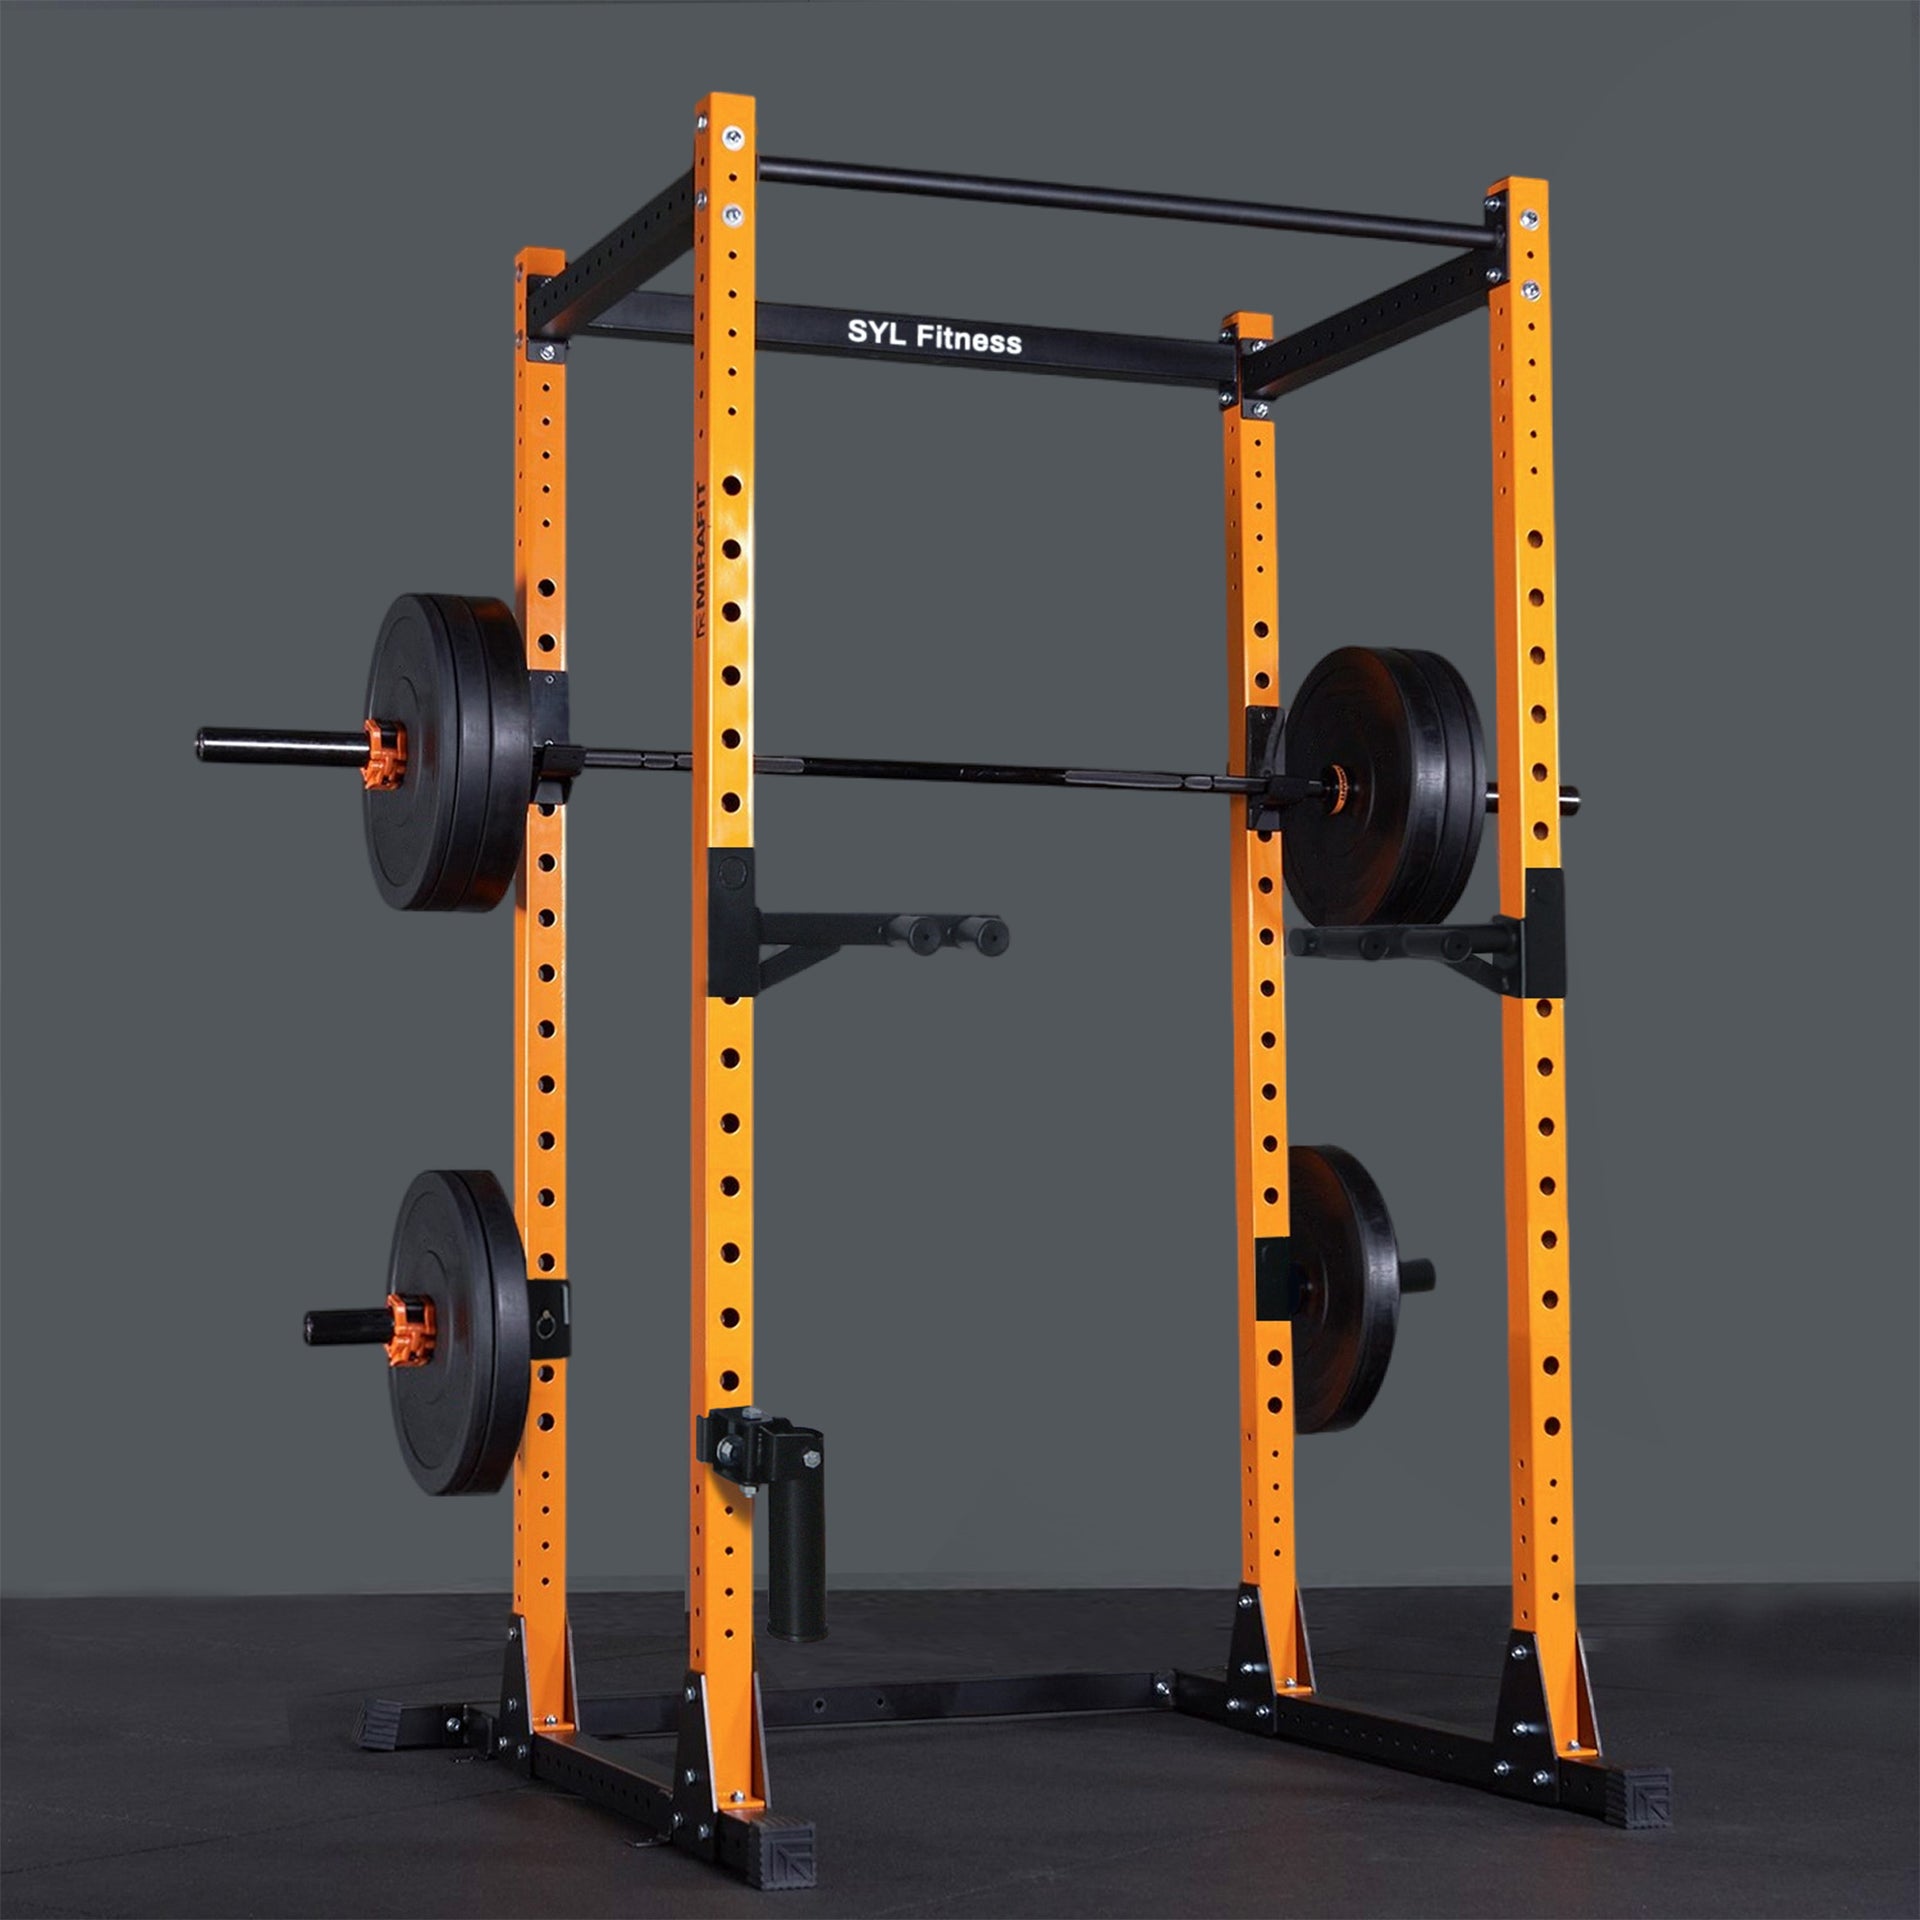 POWER RACK ATTACHMENTS – SYL Fitness